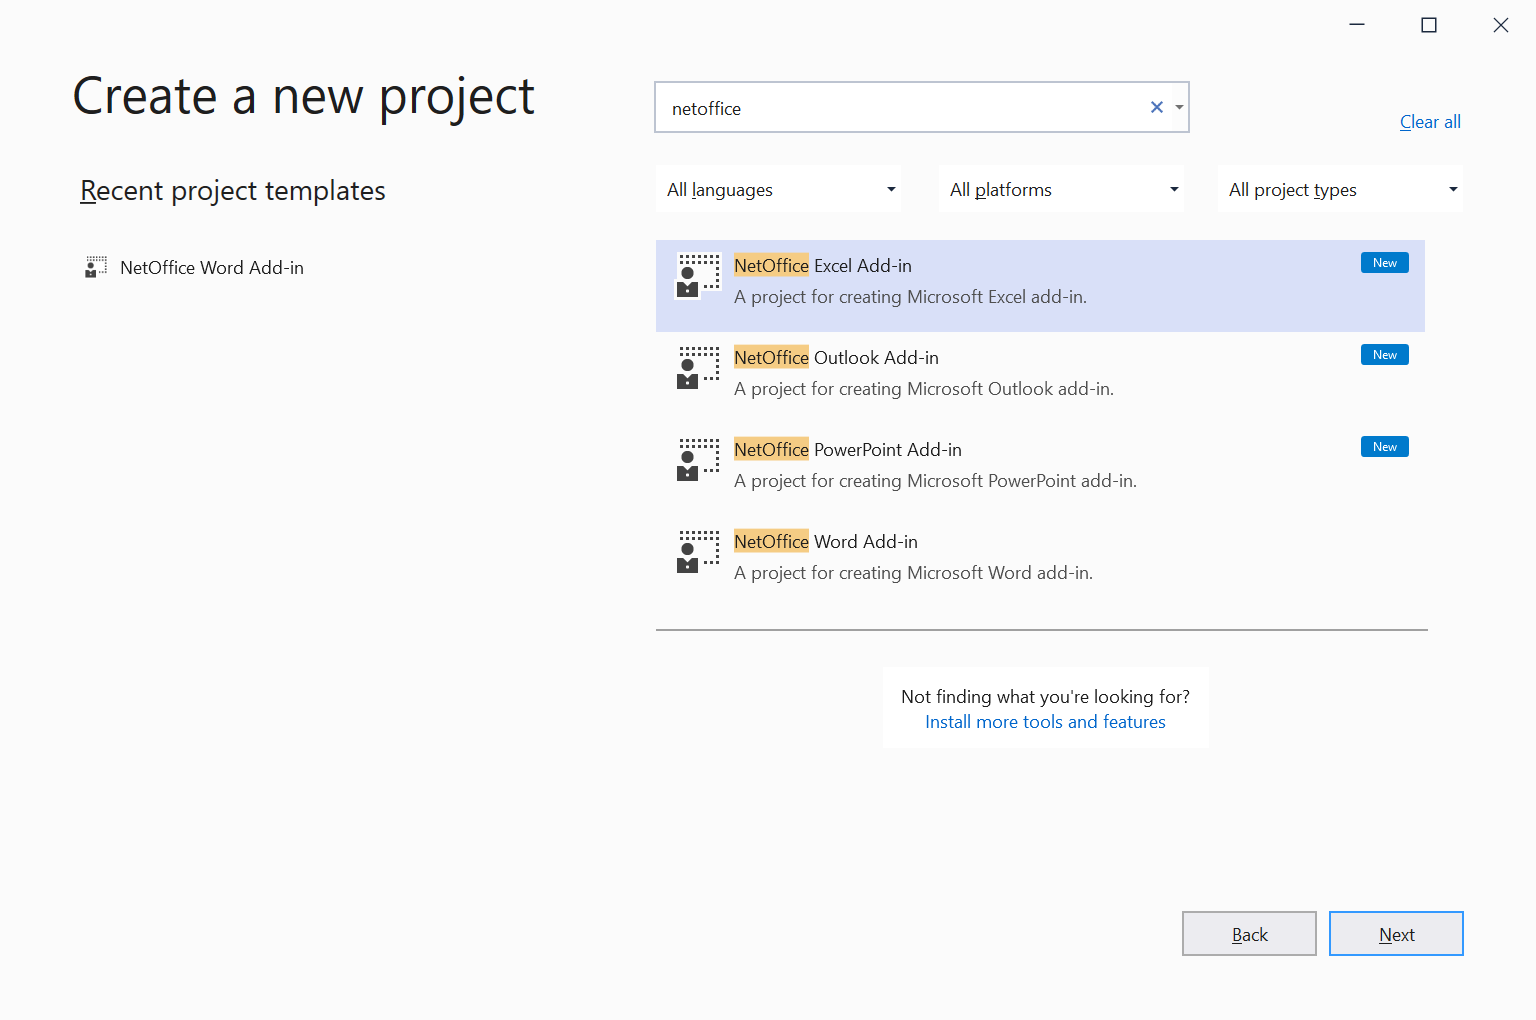 Create new project - NetOffice add-in templates